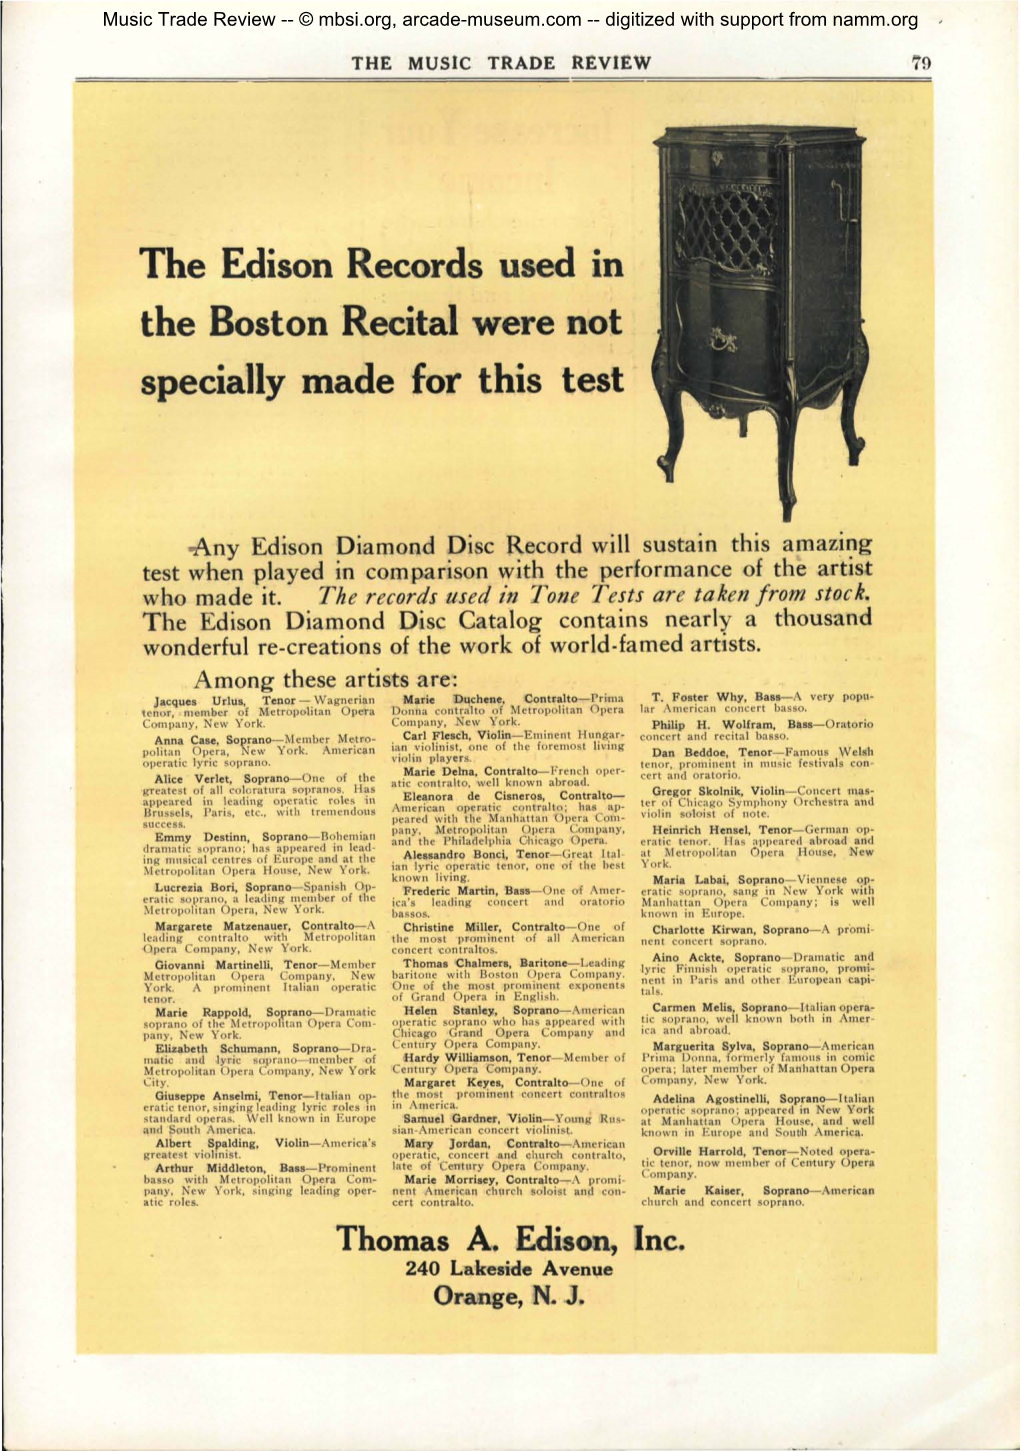 The Edison Records Used in the Boston Recital Were Not Specially Made for This Test